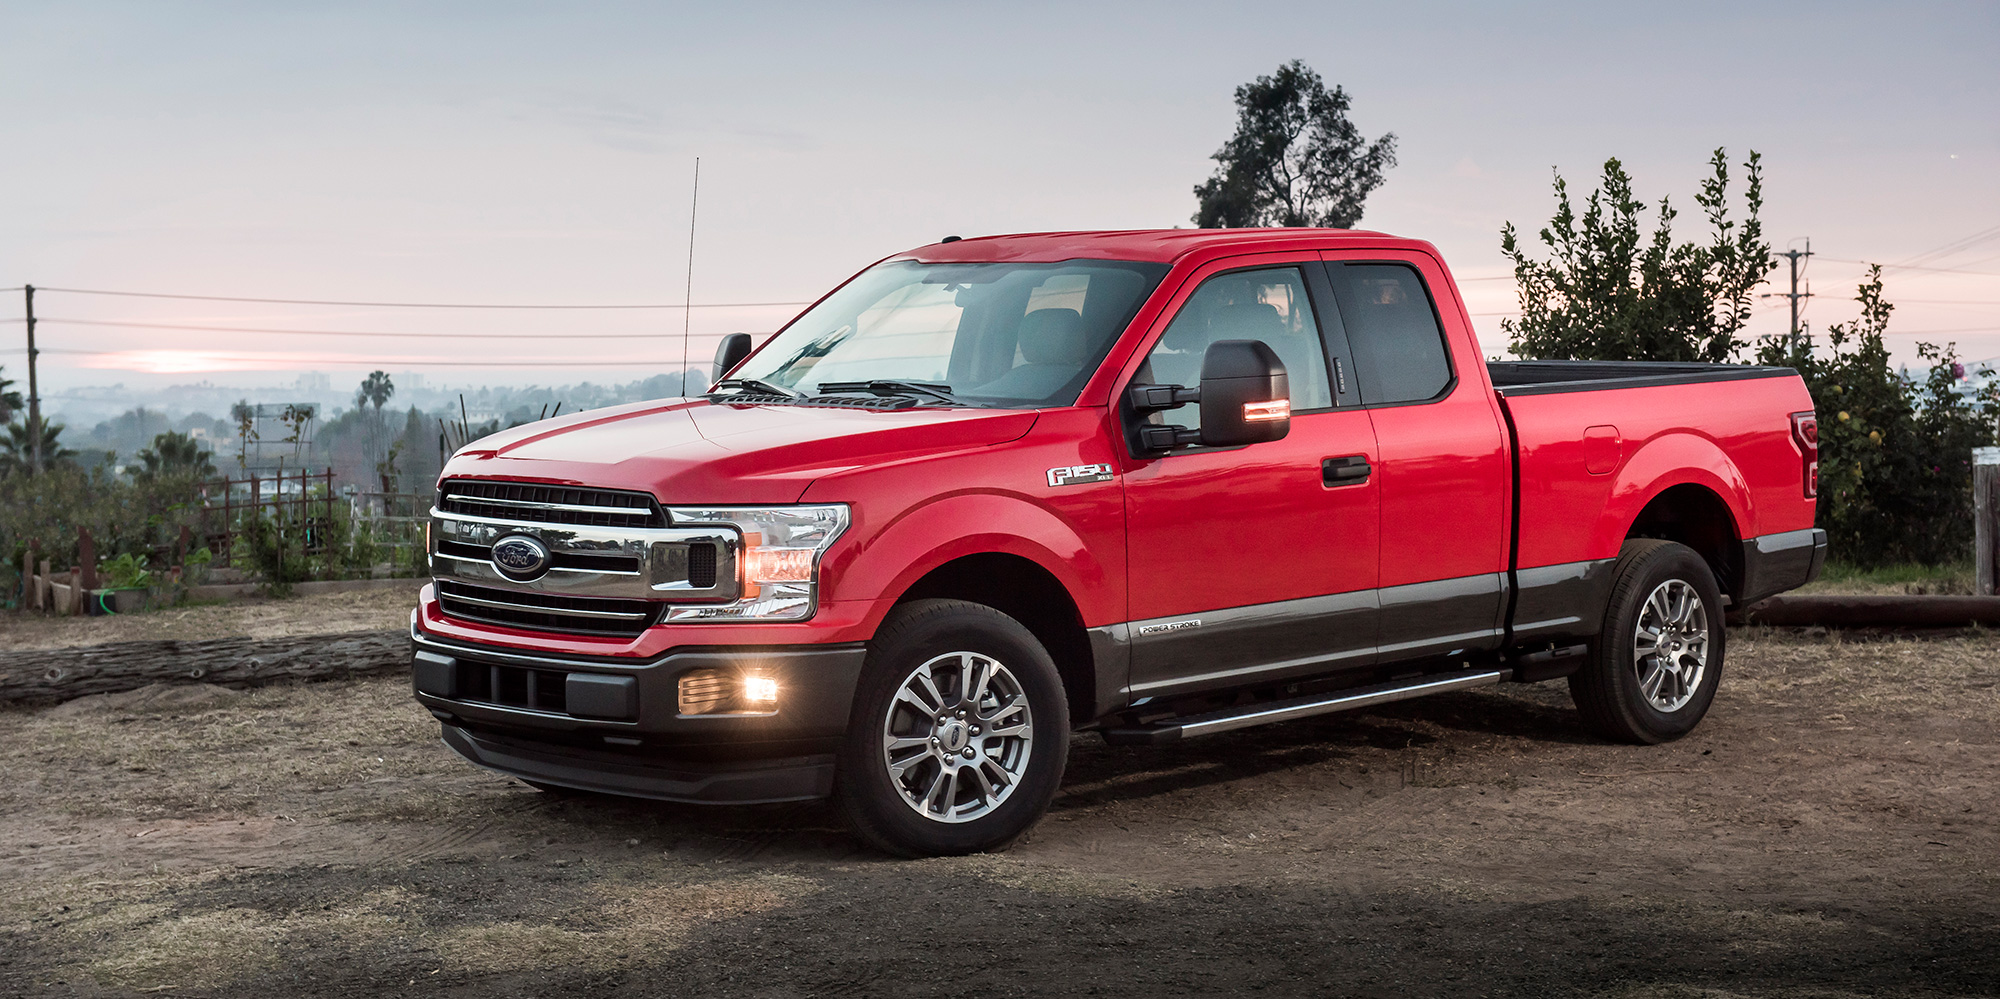 The first-ever F-150 Diesel was introduced in 2018